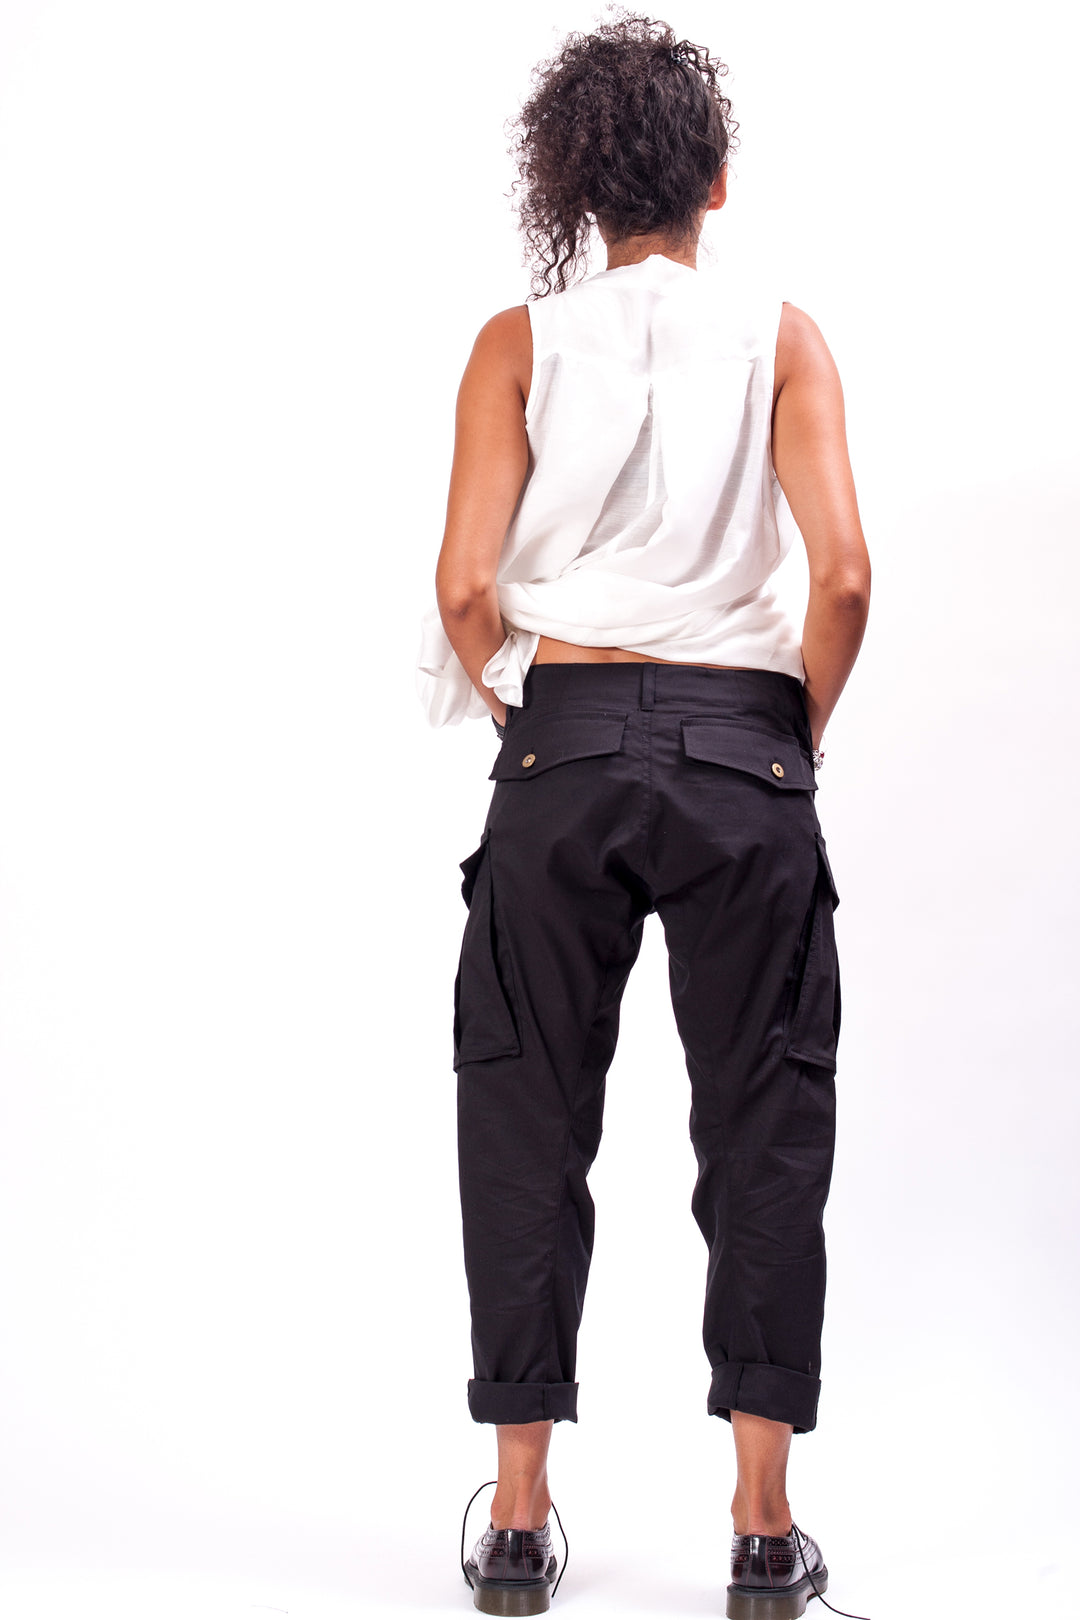 Casual Low Waisted Black Cargo Pants